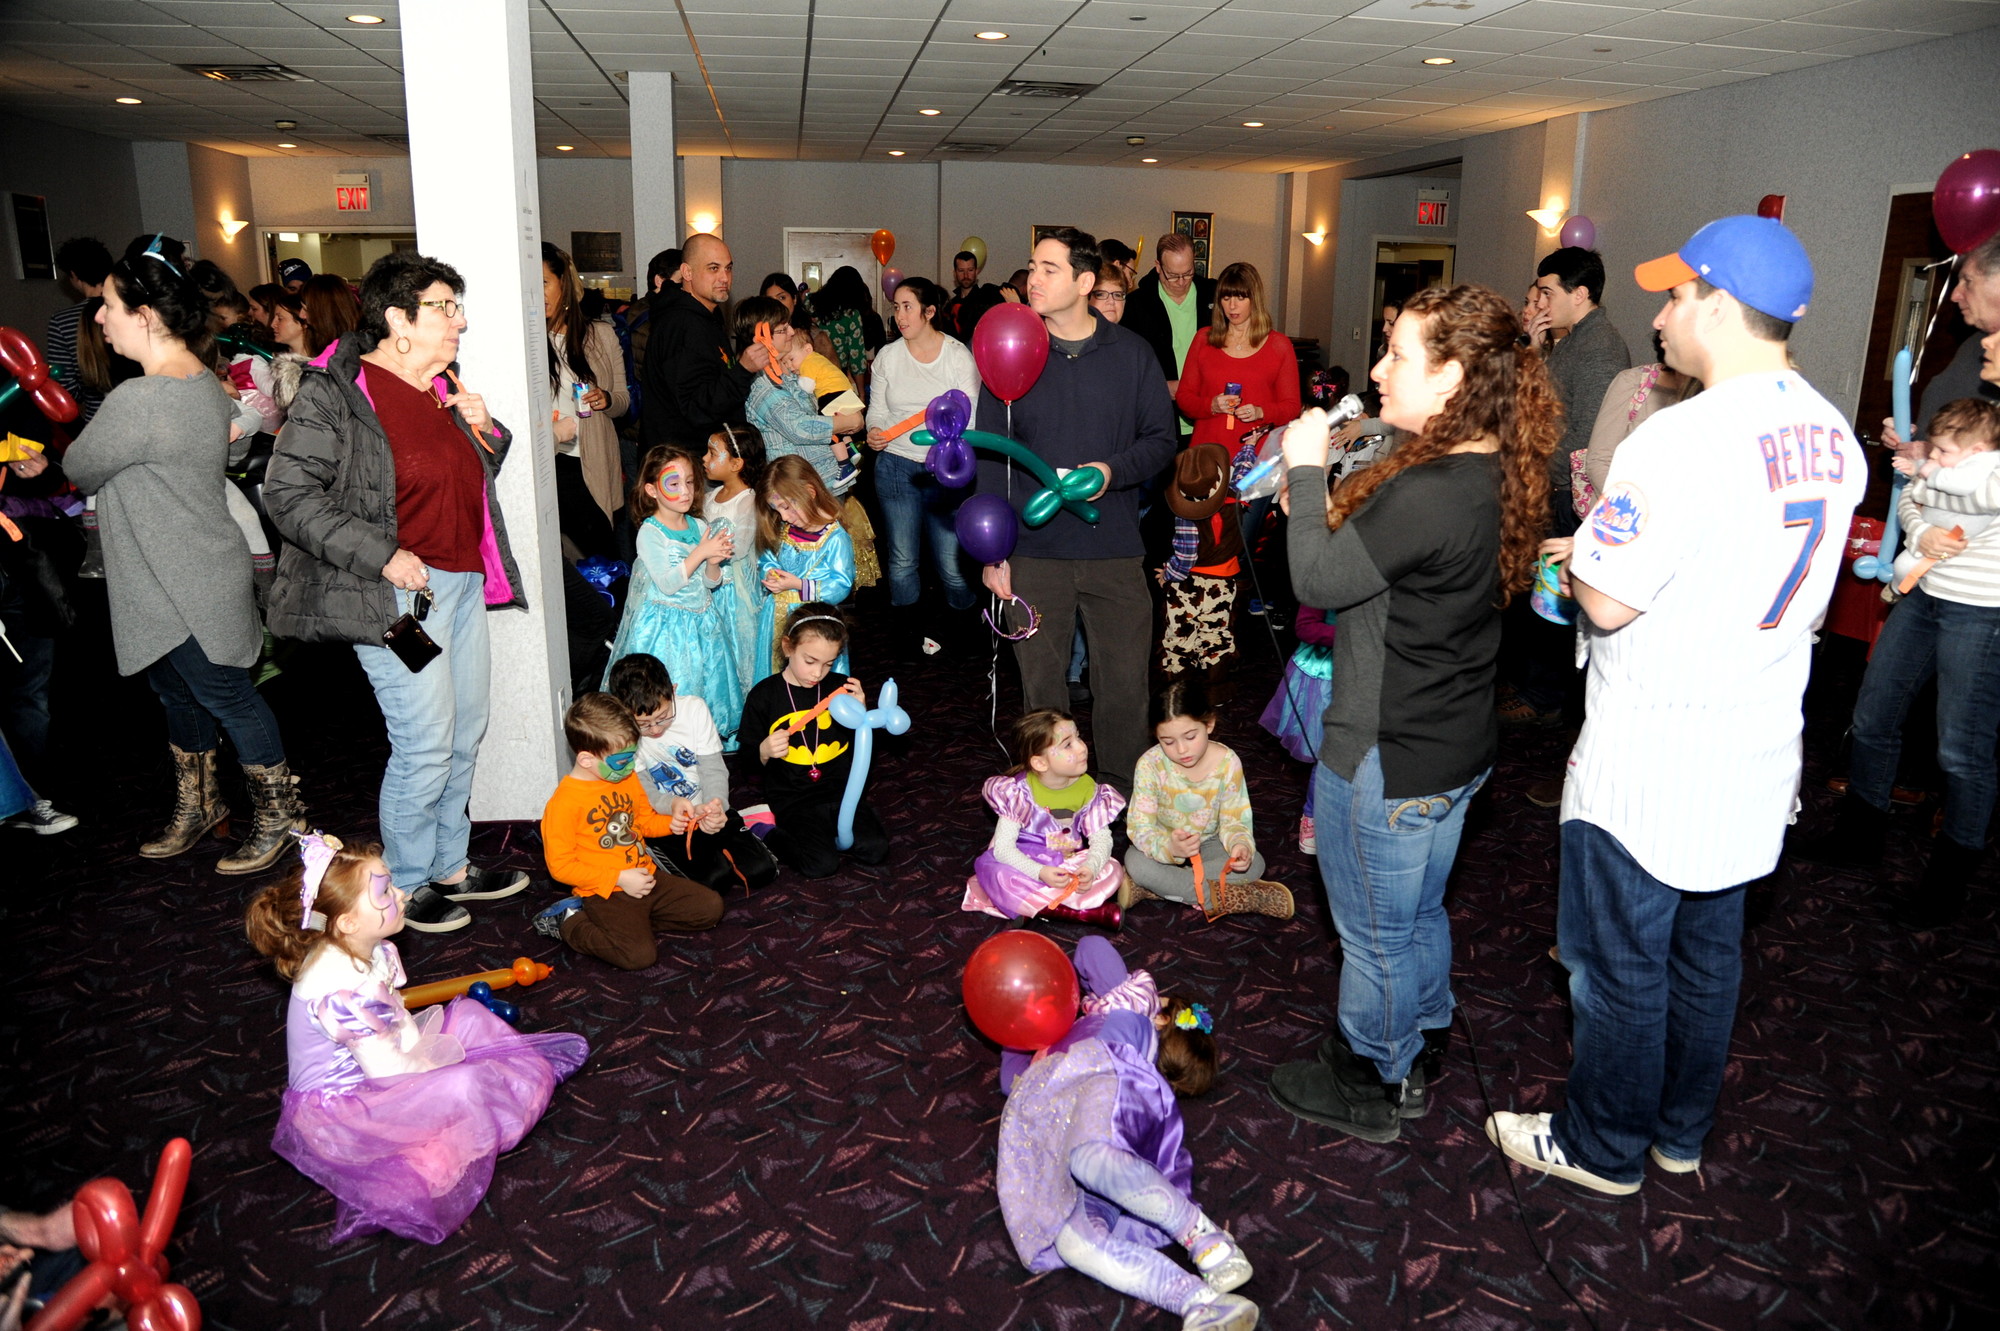 About 300 people attended the fundraiser at the East Meadow Jewish Center, which raised more than $4,000.